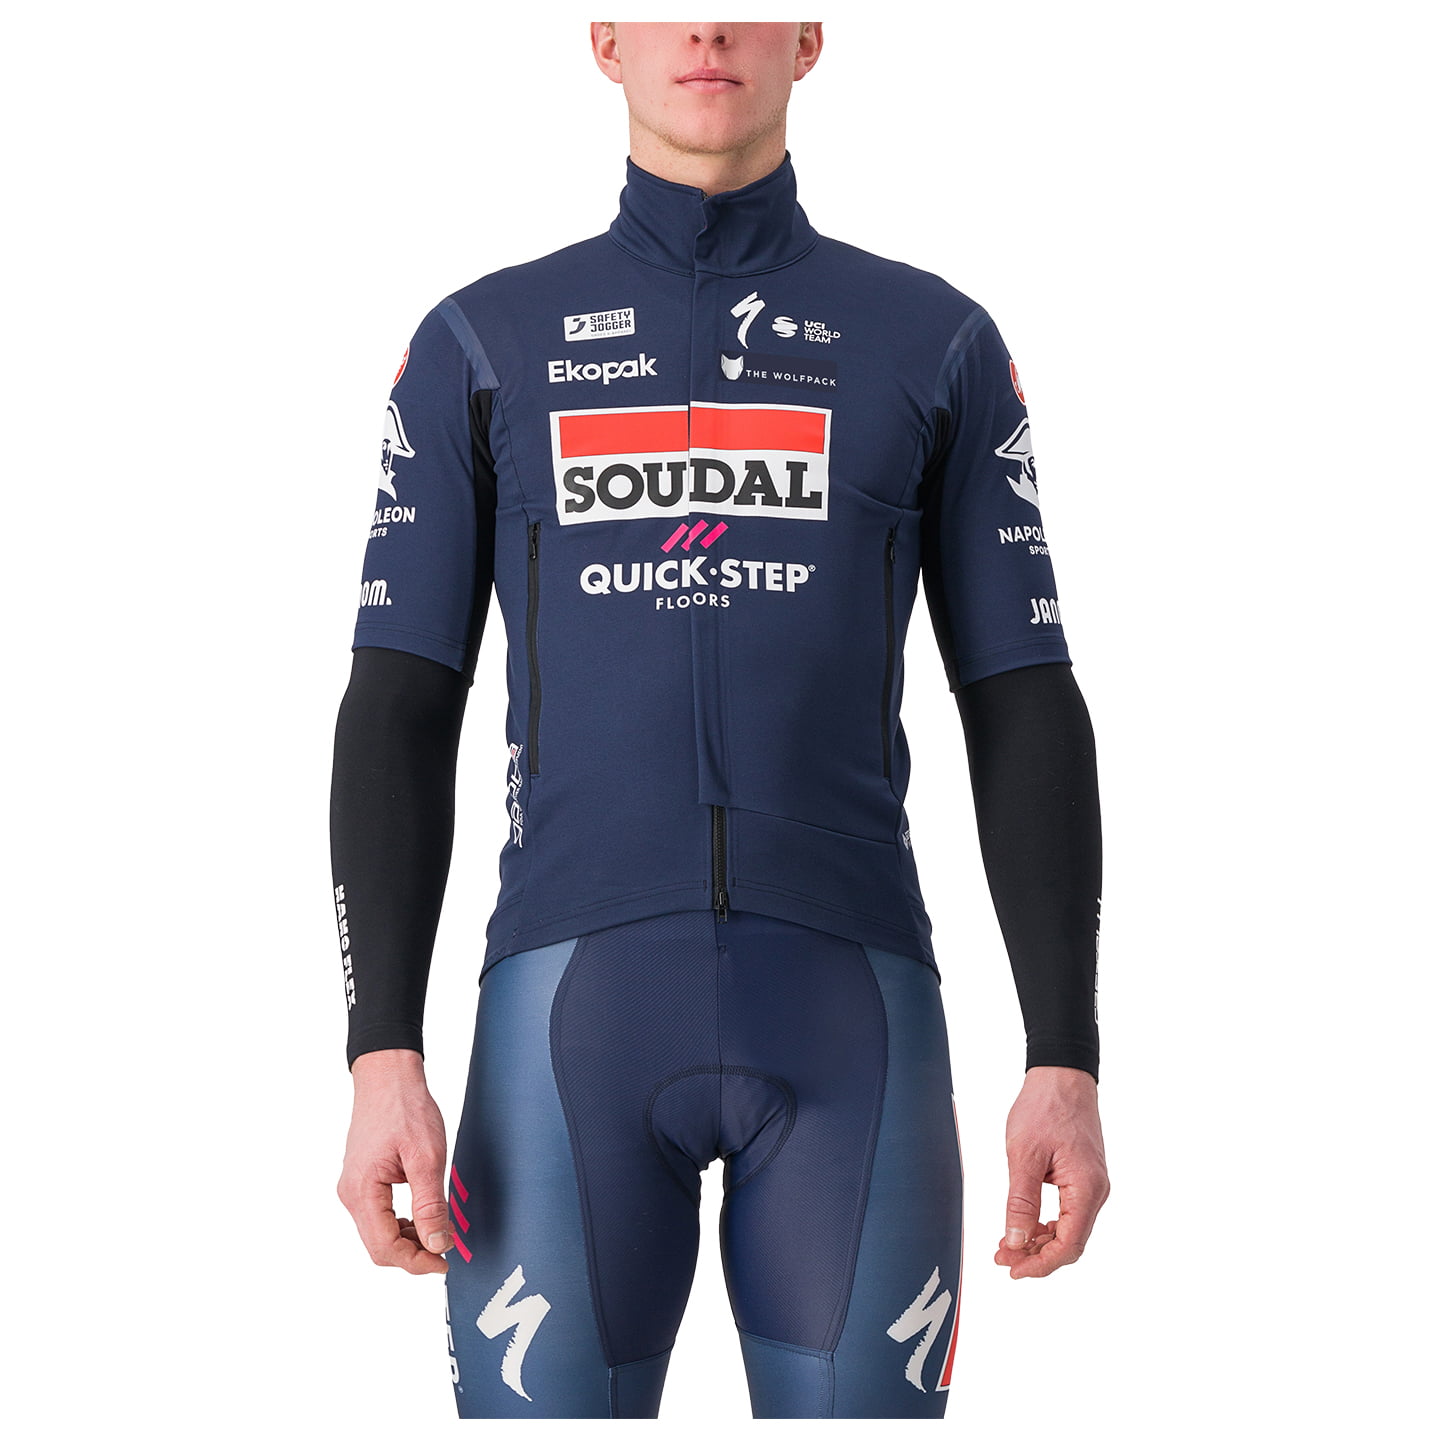 SOUDAL QUICK-STEP Short Sleeve 2024 Light Jacket, for men, size M, Cycle jacket, Cycle clothing